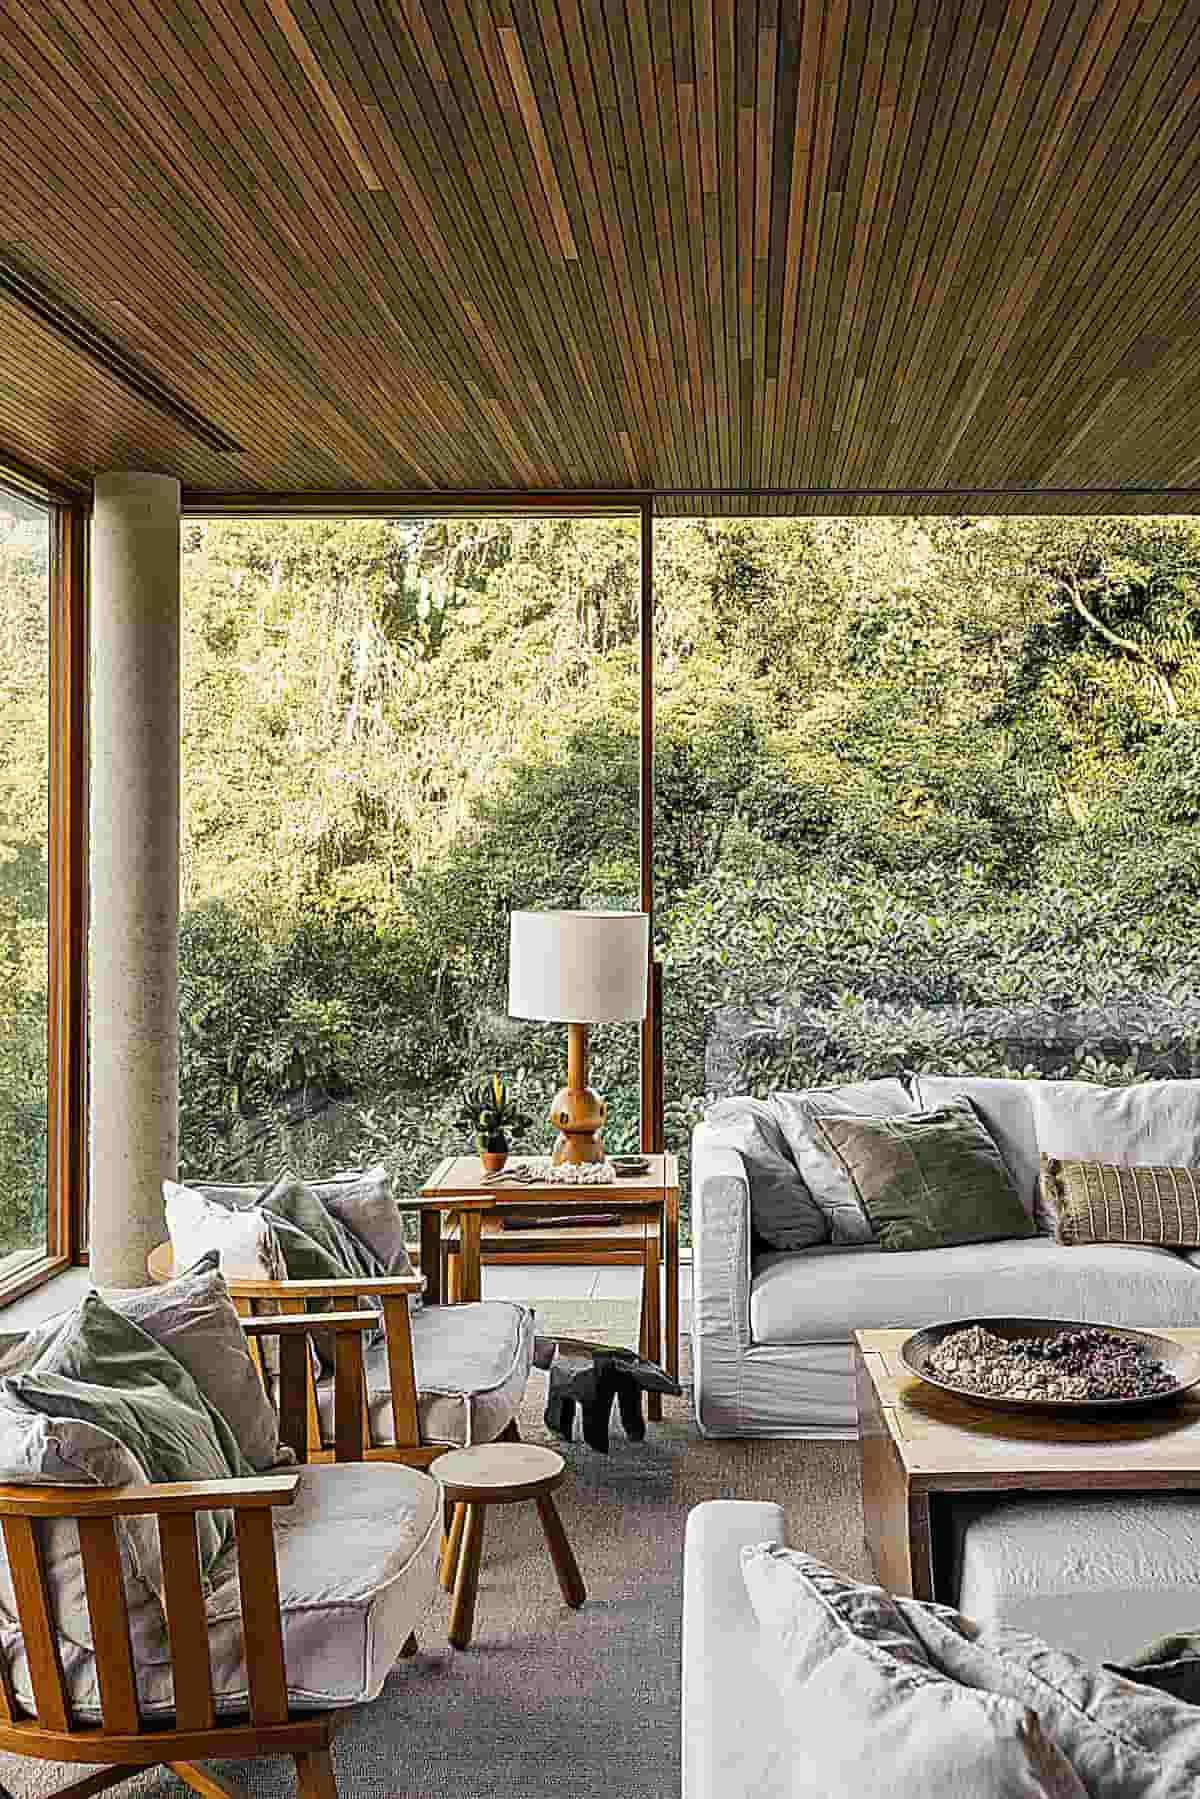 Nature Through a Soulful Palette of Natural Materials Such as Wood, Rattan, and Linen, Handcrafted Details has Further Underscored the Project’s Intimate Connection and Beautifully Framed Views of the Surroundings